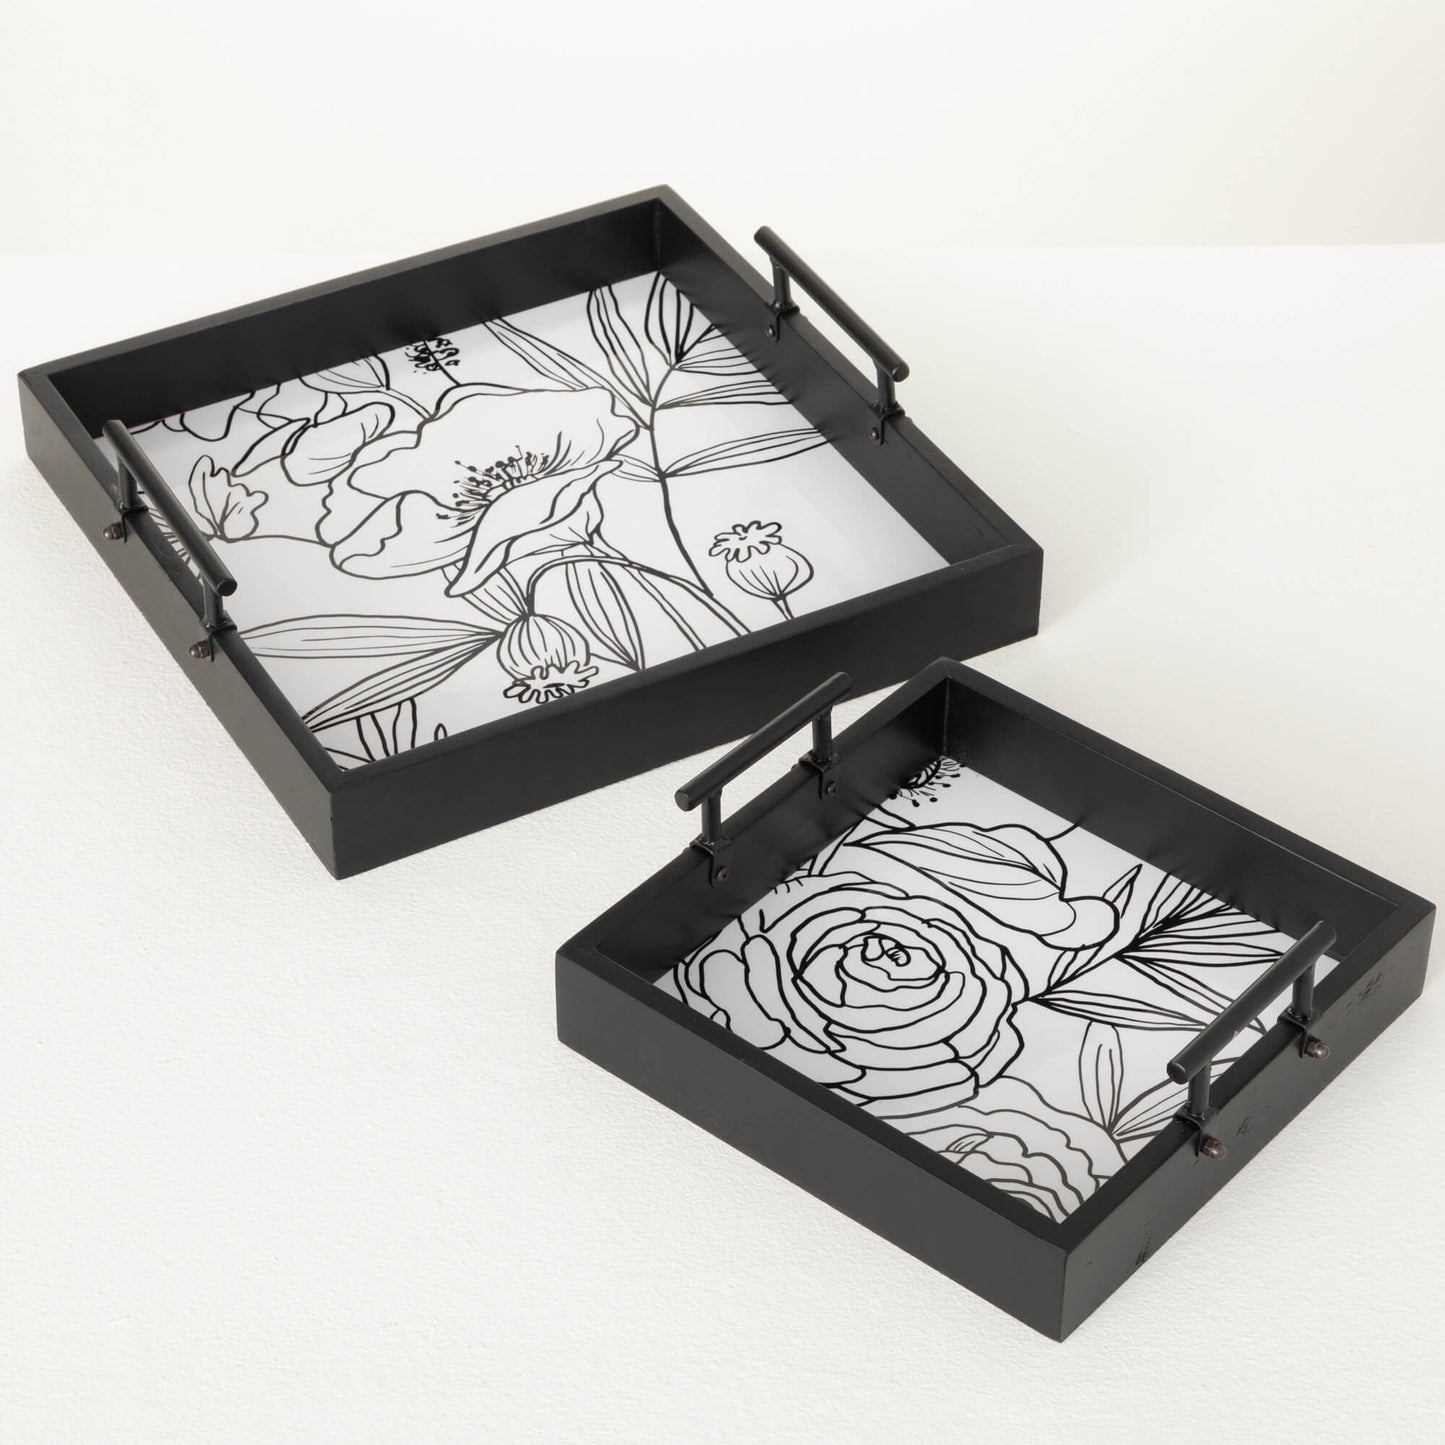 2 sizes of black wooden trays with white base in the interior with line drawings of a dahlia in small tray and poppies in the large tray.